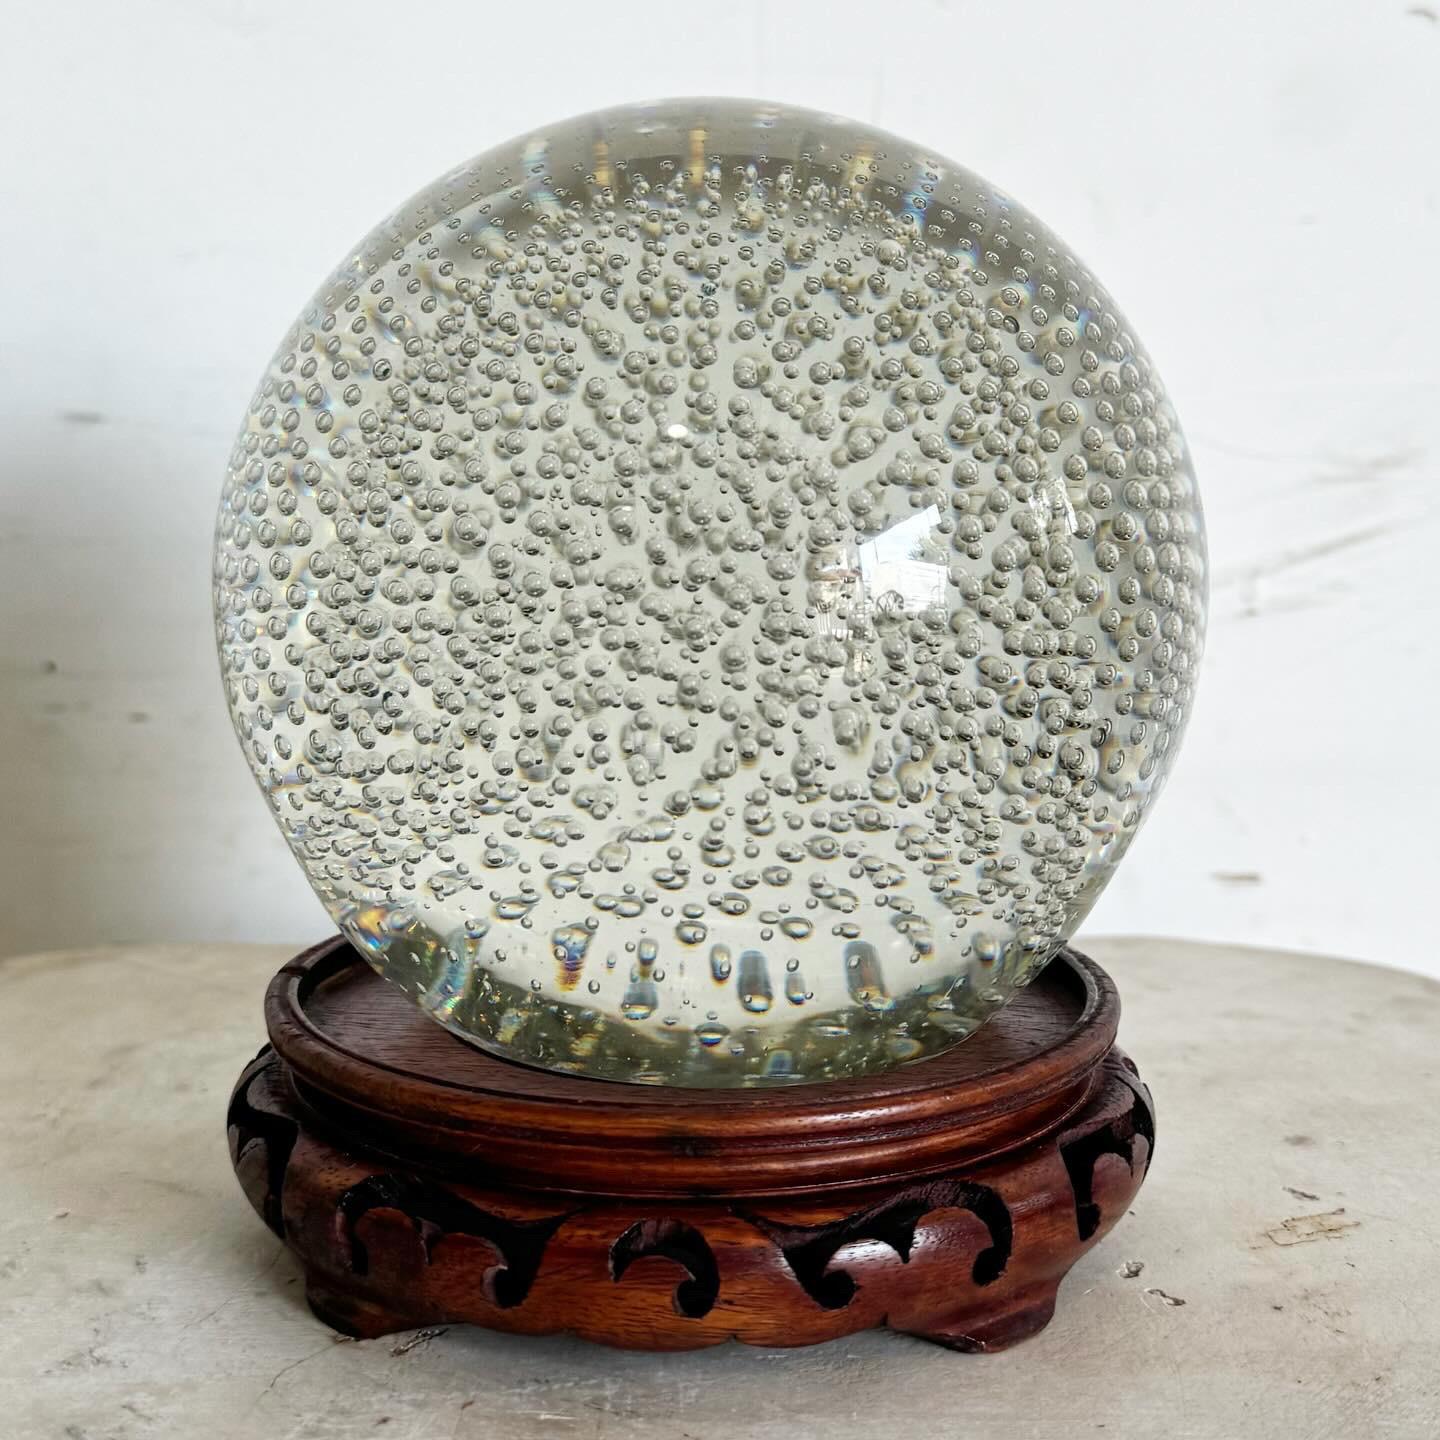 The Vintage Bubbled Spherical Paper Weight by Kaiser Krystal is a stunning addition to any desk or shelf. Crafted from high-quality crystal, it features a unique bubbled effect, adding depth and intrigue. This paper weight is both functional and